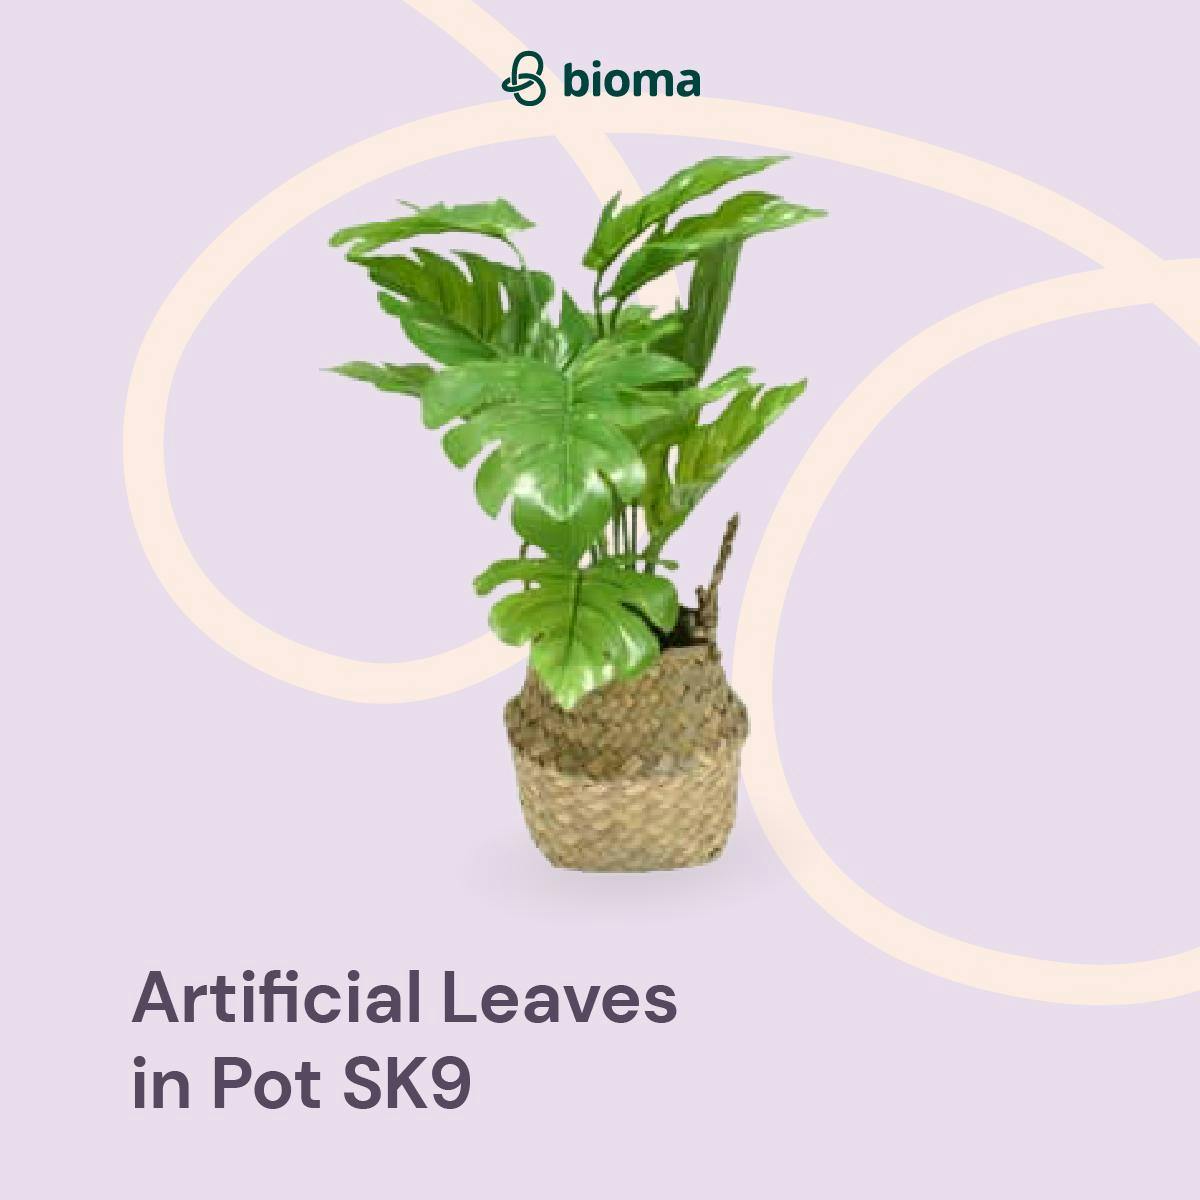 Artificial Leaves in Pot SK9